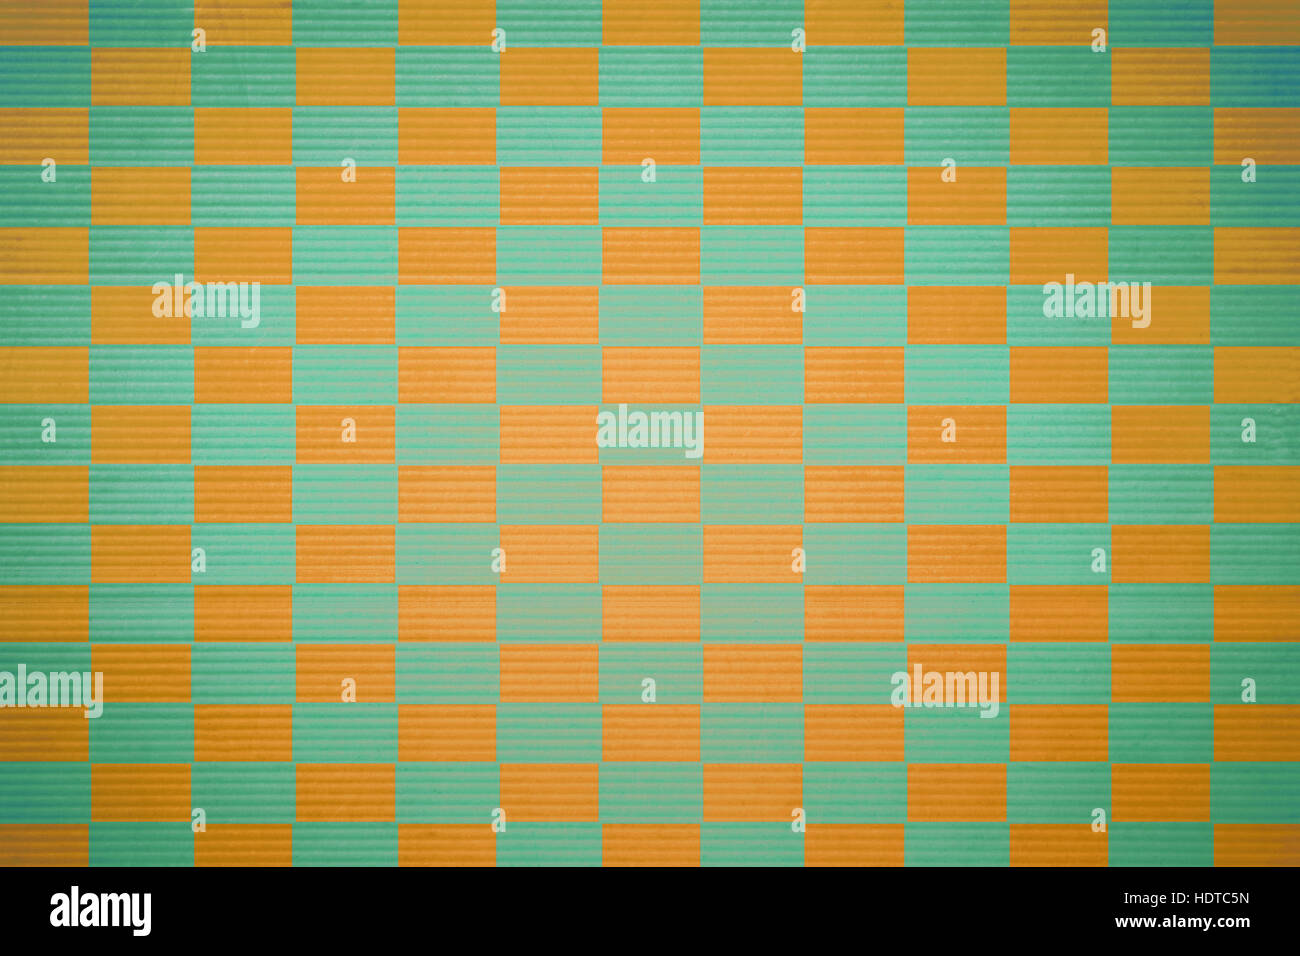 Illustrated background of tilted squares in two colors - green and orange Stock Photo